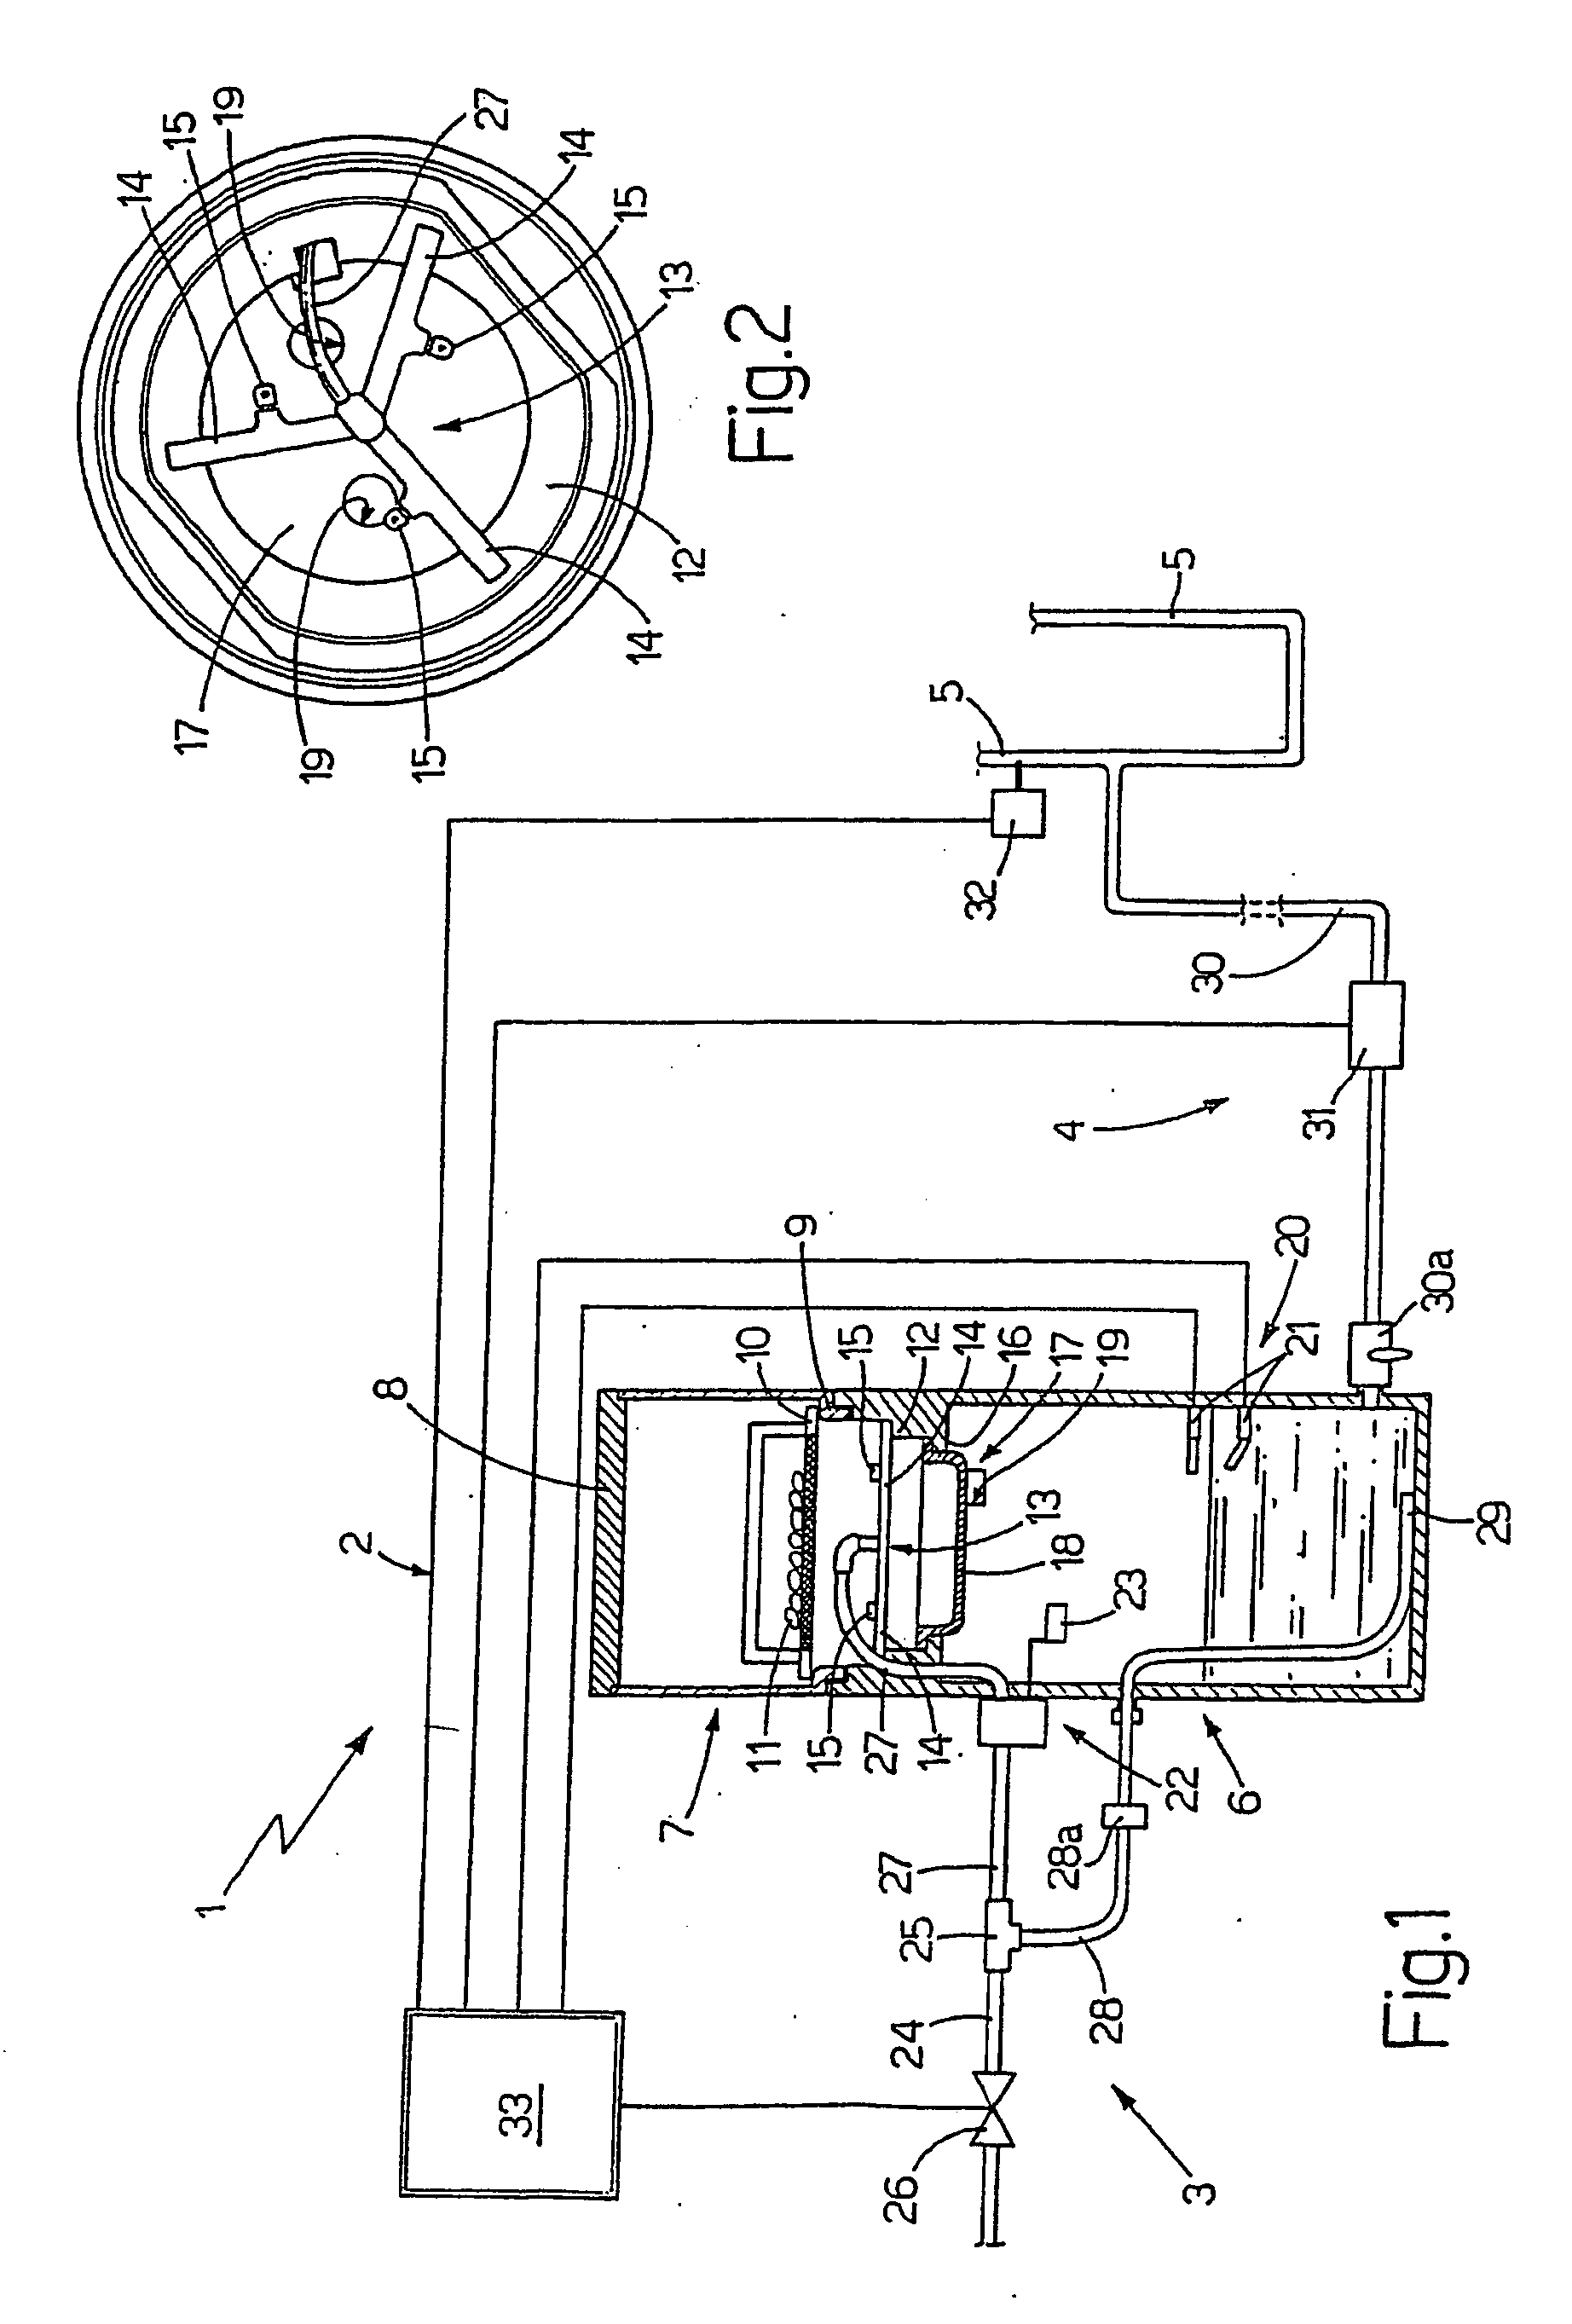 Water chlorinating device